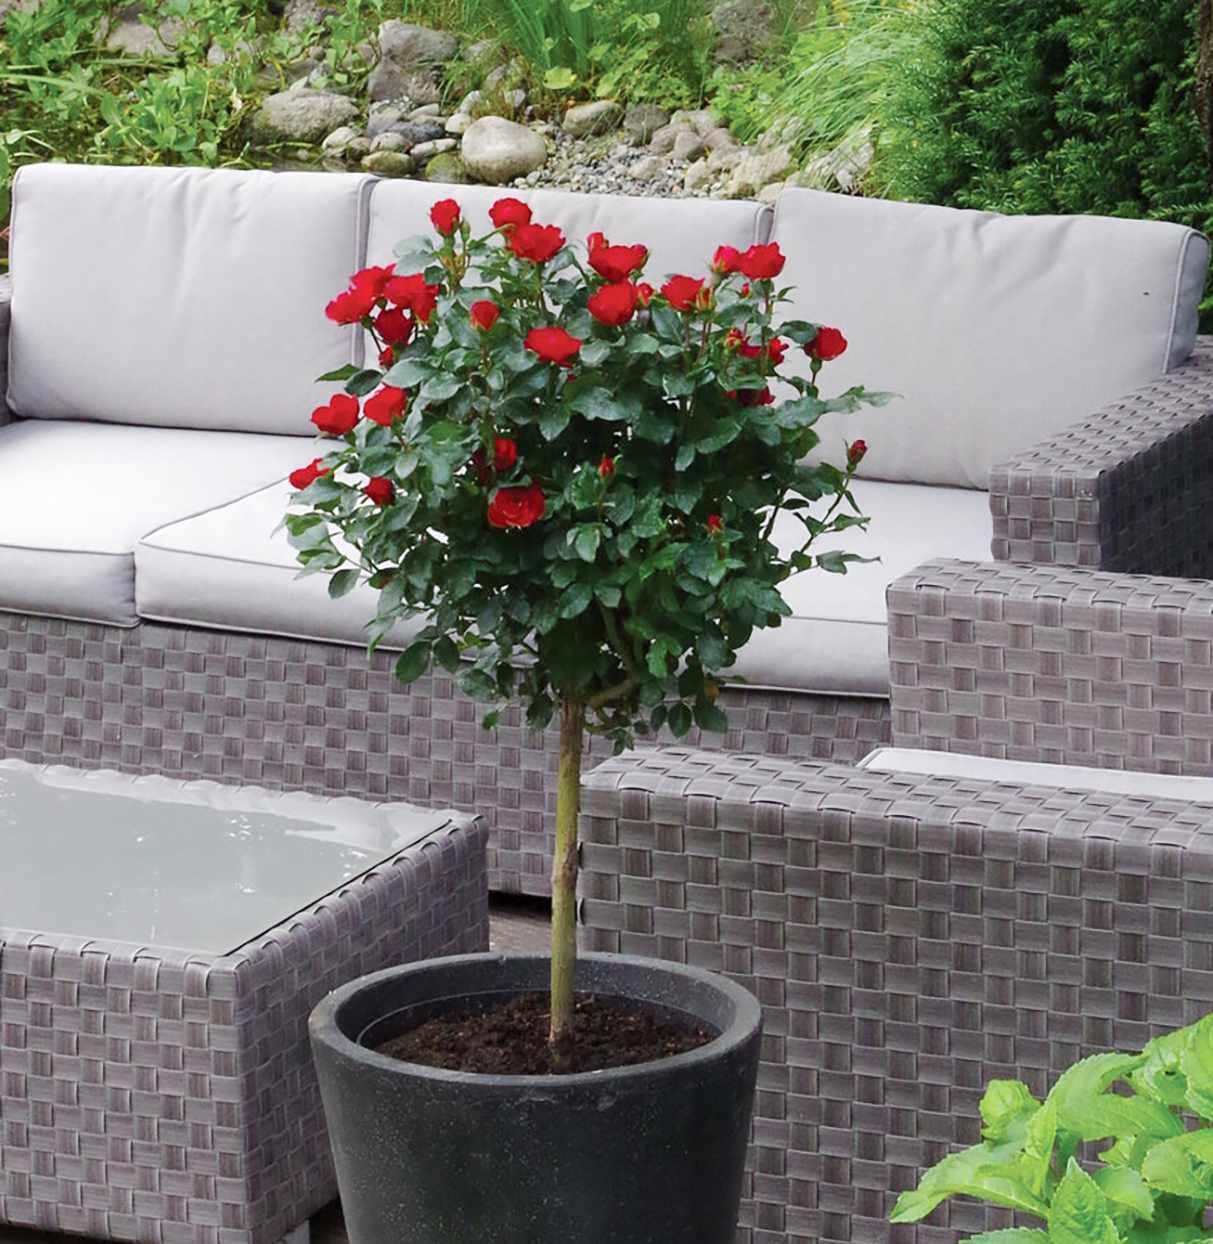 petite knock out red rose tree in black pot in patio sofa area